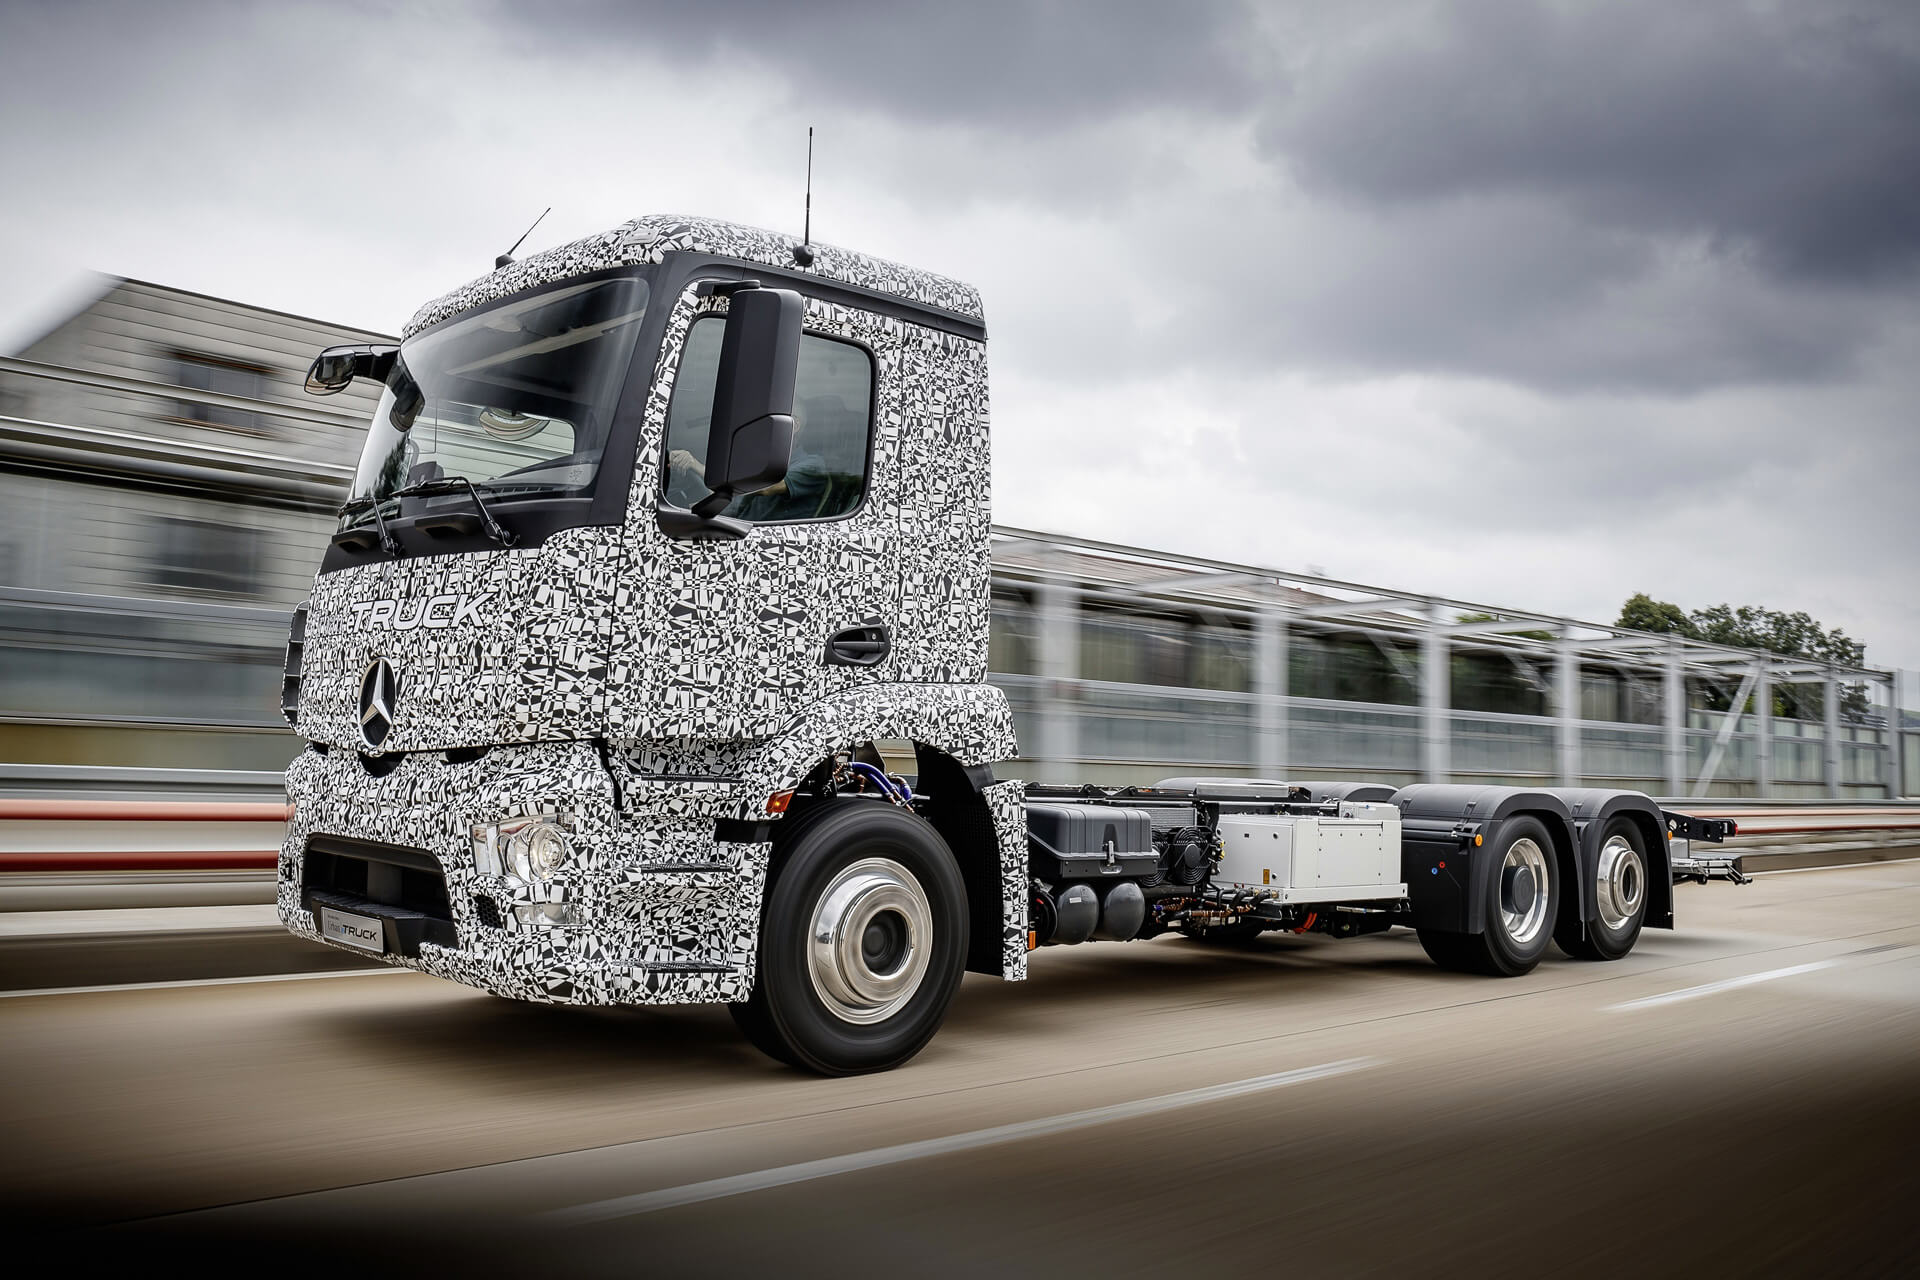 Mercedes-Benz shows off the Urban eTruck, an electric big rig that can haul 29 tons